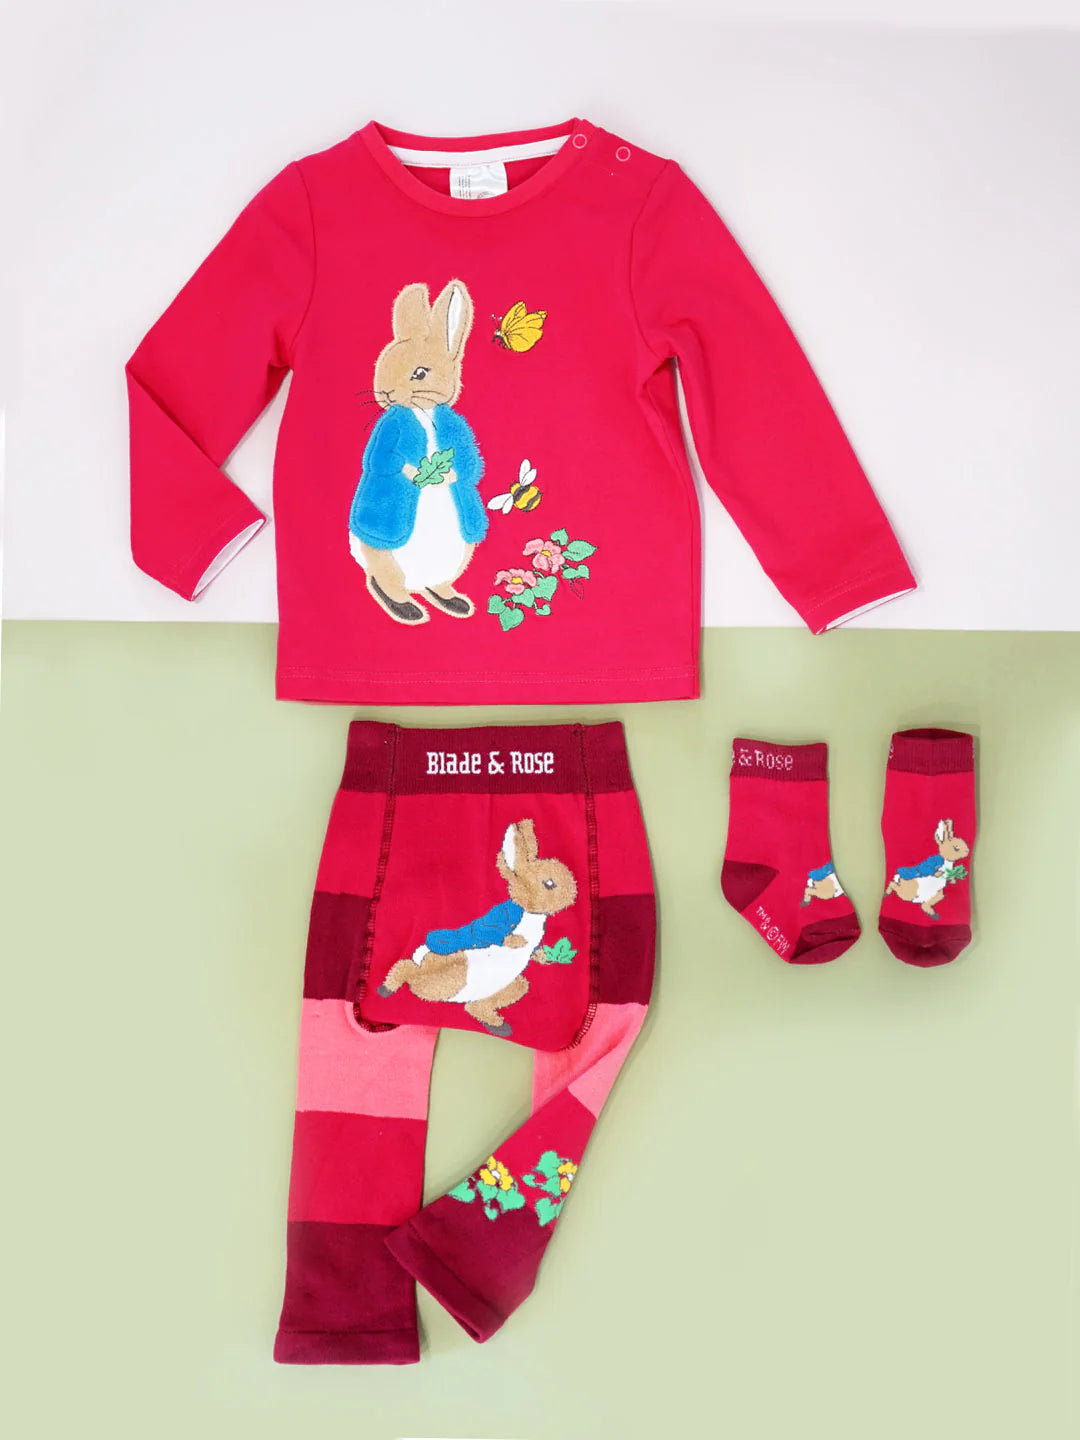 blade & rose peter rabbit autumn leaves leggings at whippersnappers online